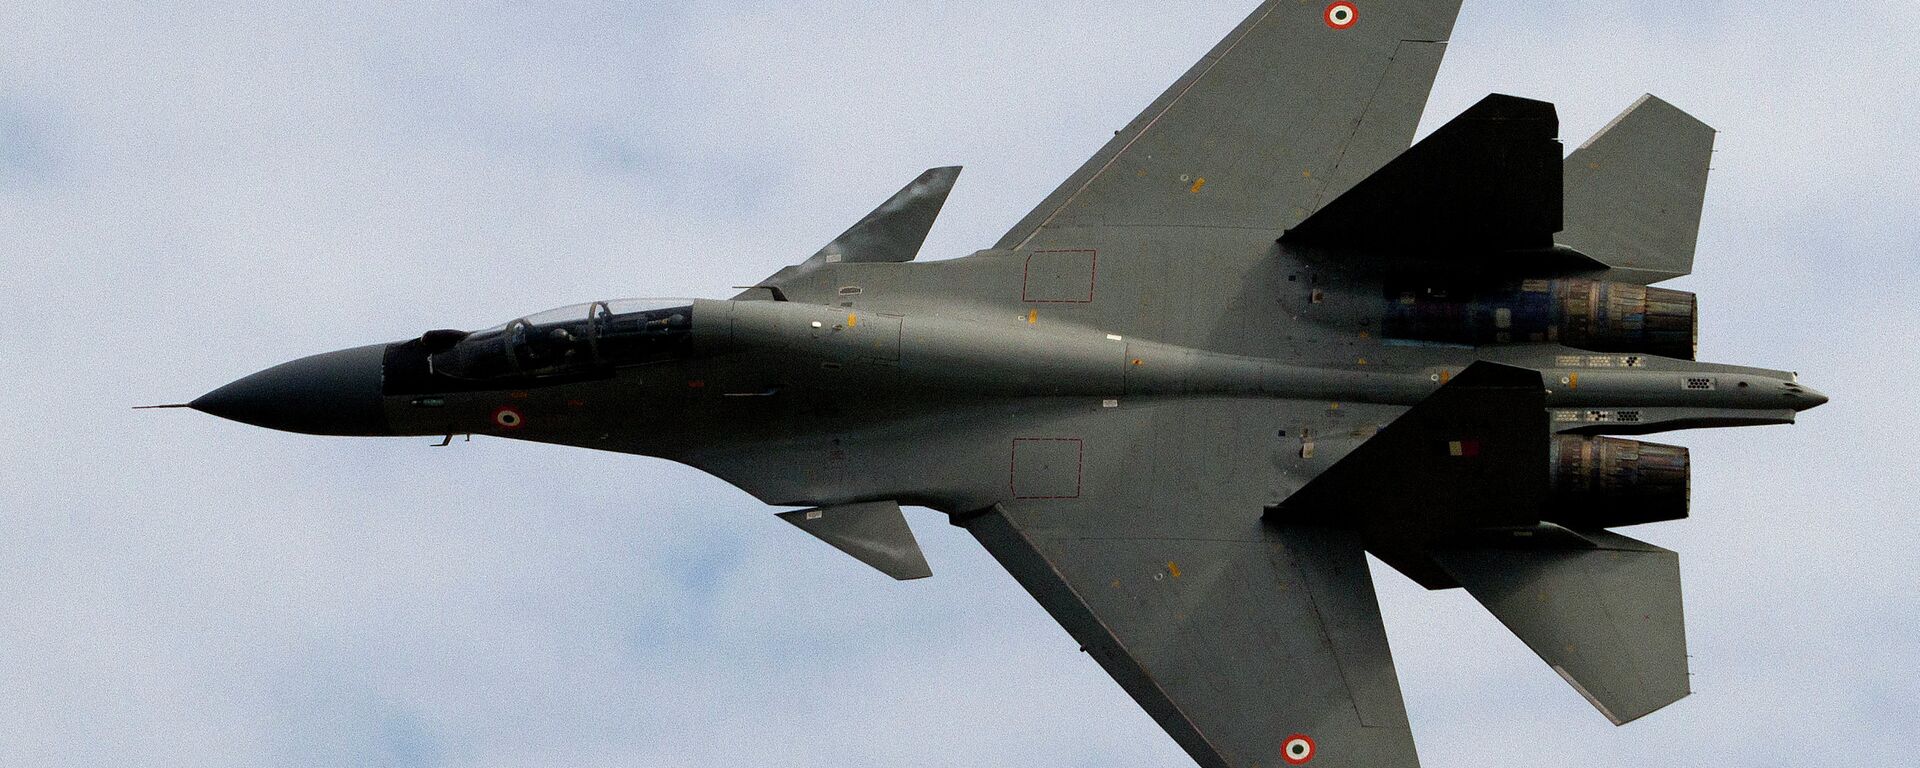 Indian Air Force (IAF) Sukhoi Su-30 fighter aircraft flies past during a parade at an airbase in Tezpur, India, Friday, Nov. 21 2014 - Sputnik International, 1920, 06.12.2021